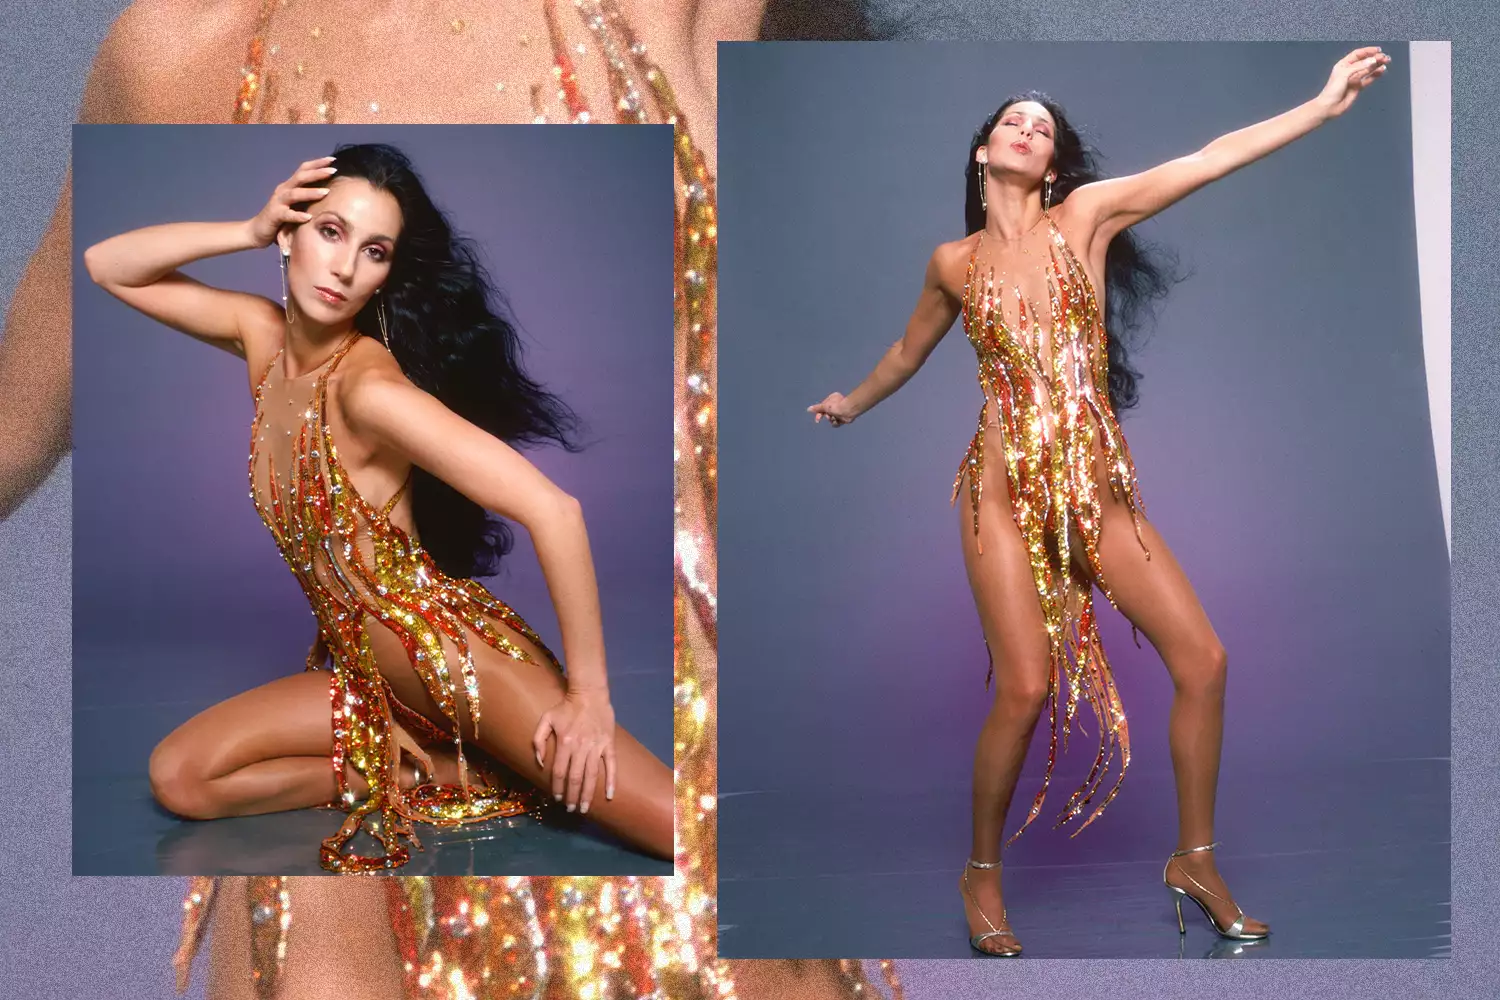 Collage of Cher photos